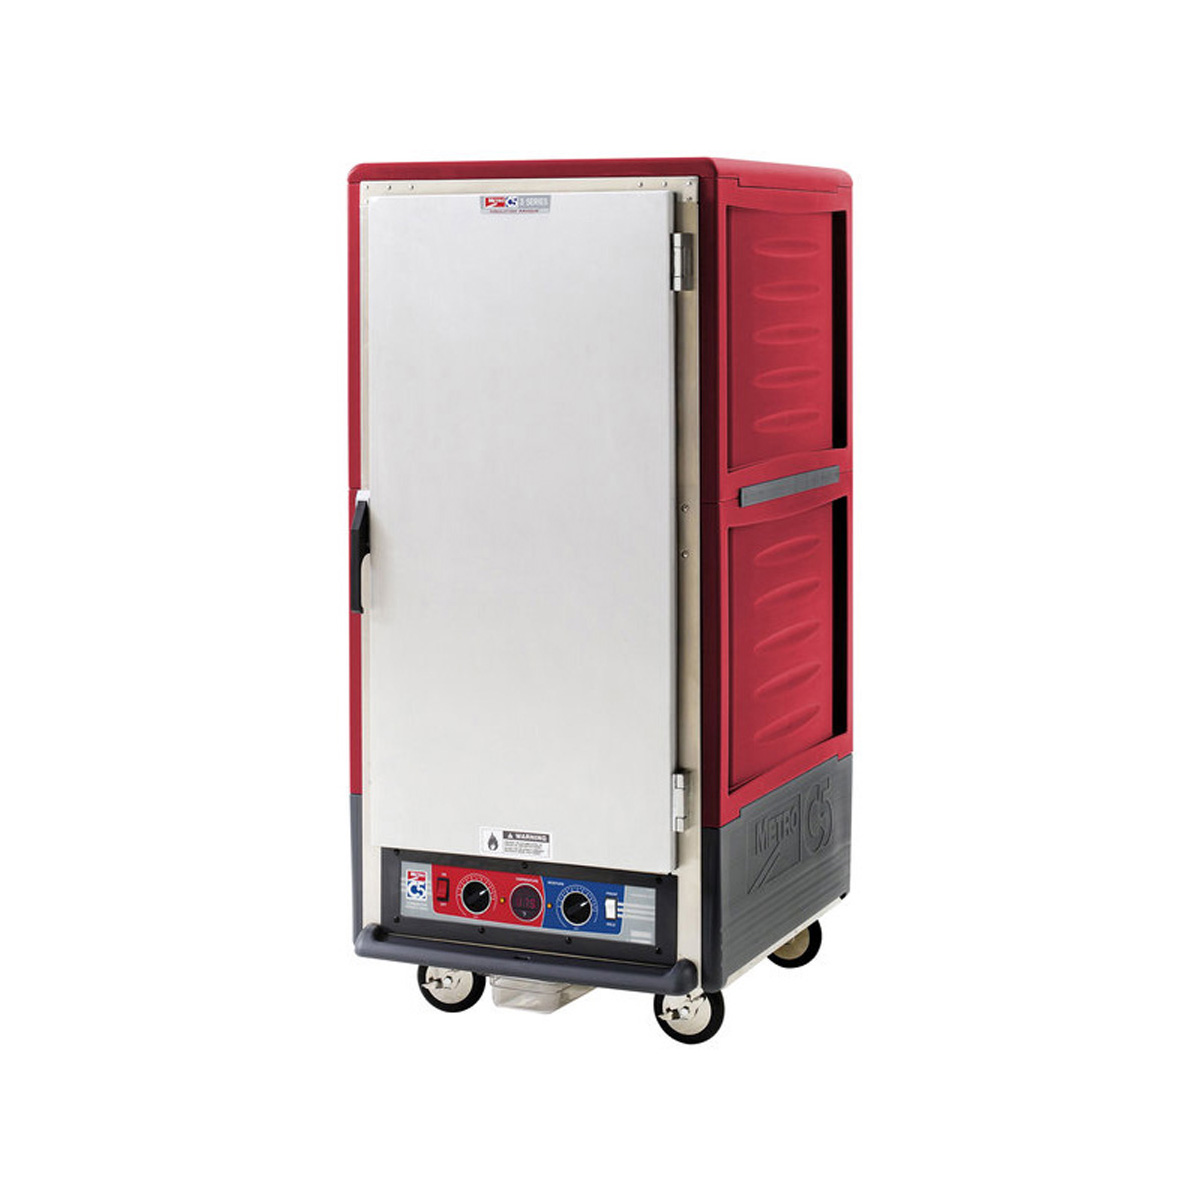 Metro C537-CFS-UA C5 3 Series Mobile Heated Holding Proofing Cabinet